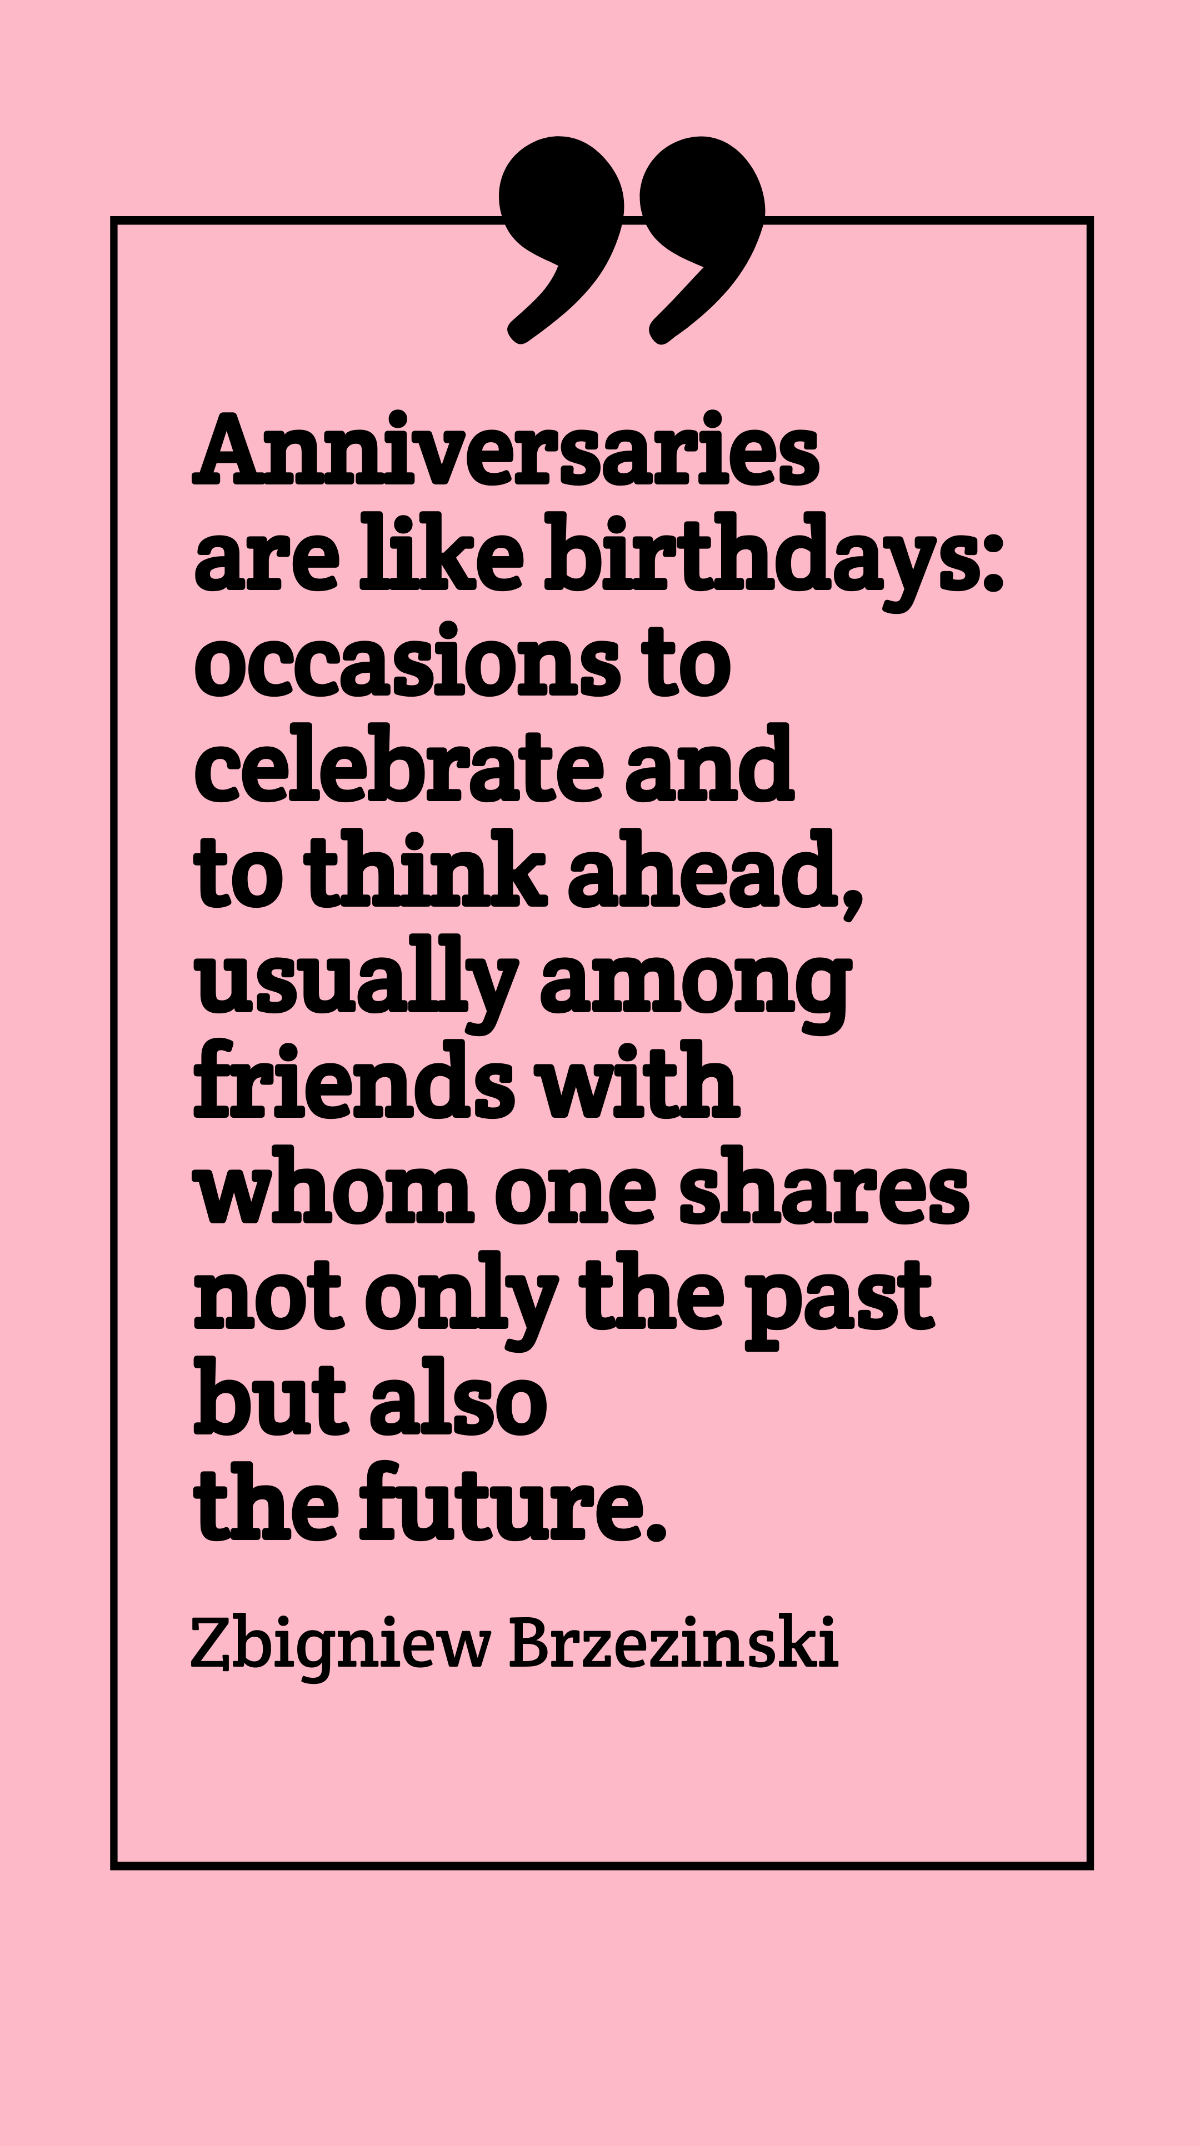 Zbigniew Brzezinski - Anniversaries are like birthdays: occasions to celebrate and to think ahead, usually among friends with whom one shares not only the past but also the future. Template